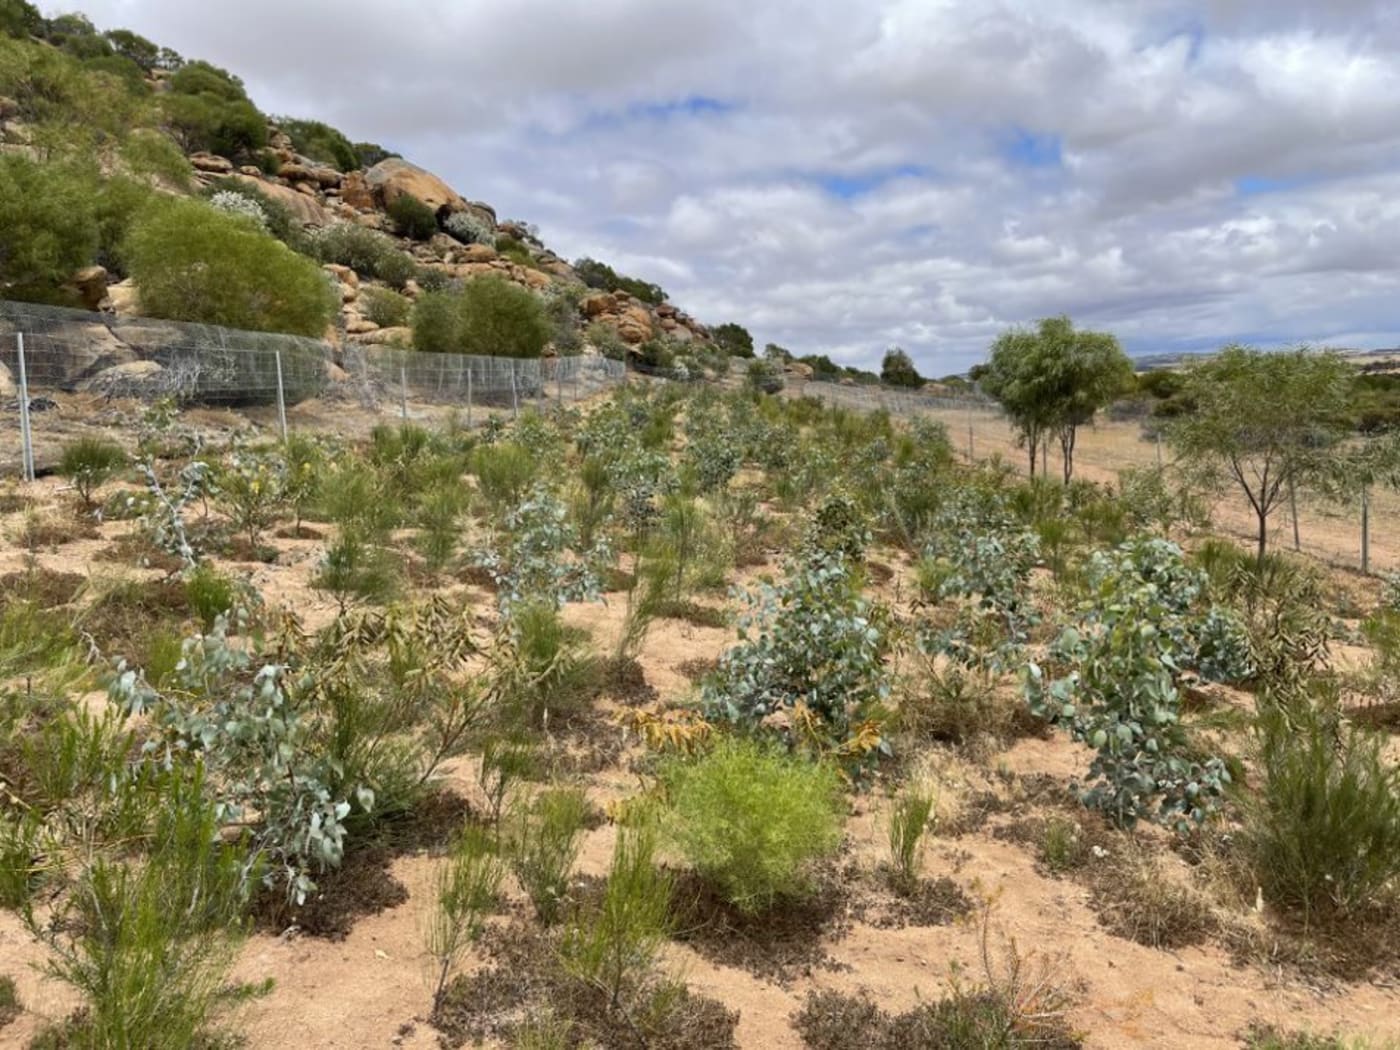 The Nangeen Hill revegetation site in WA. The plants are growing well